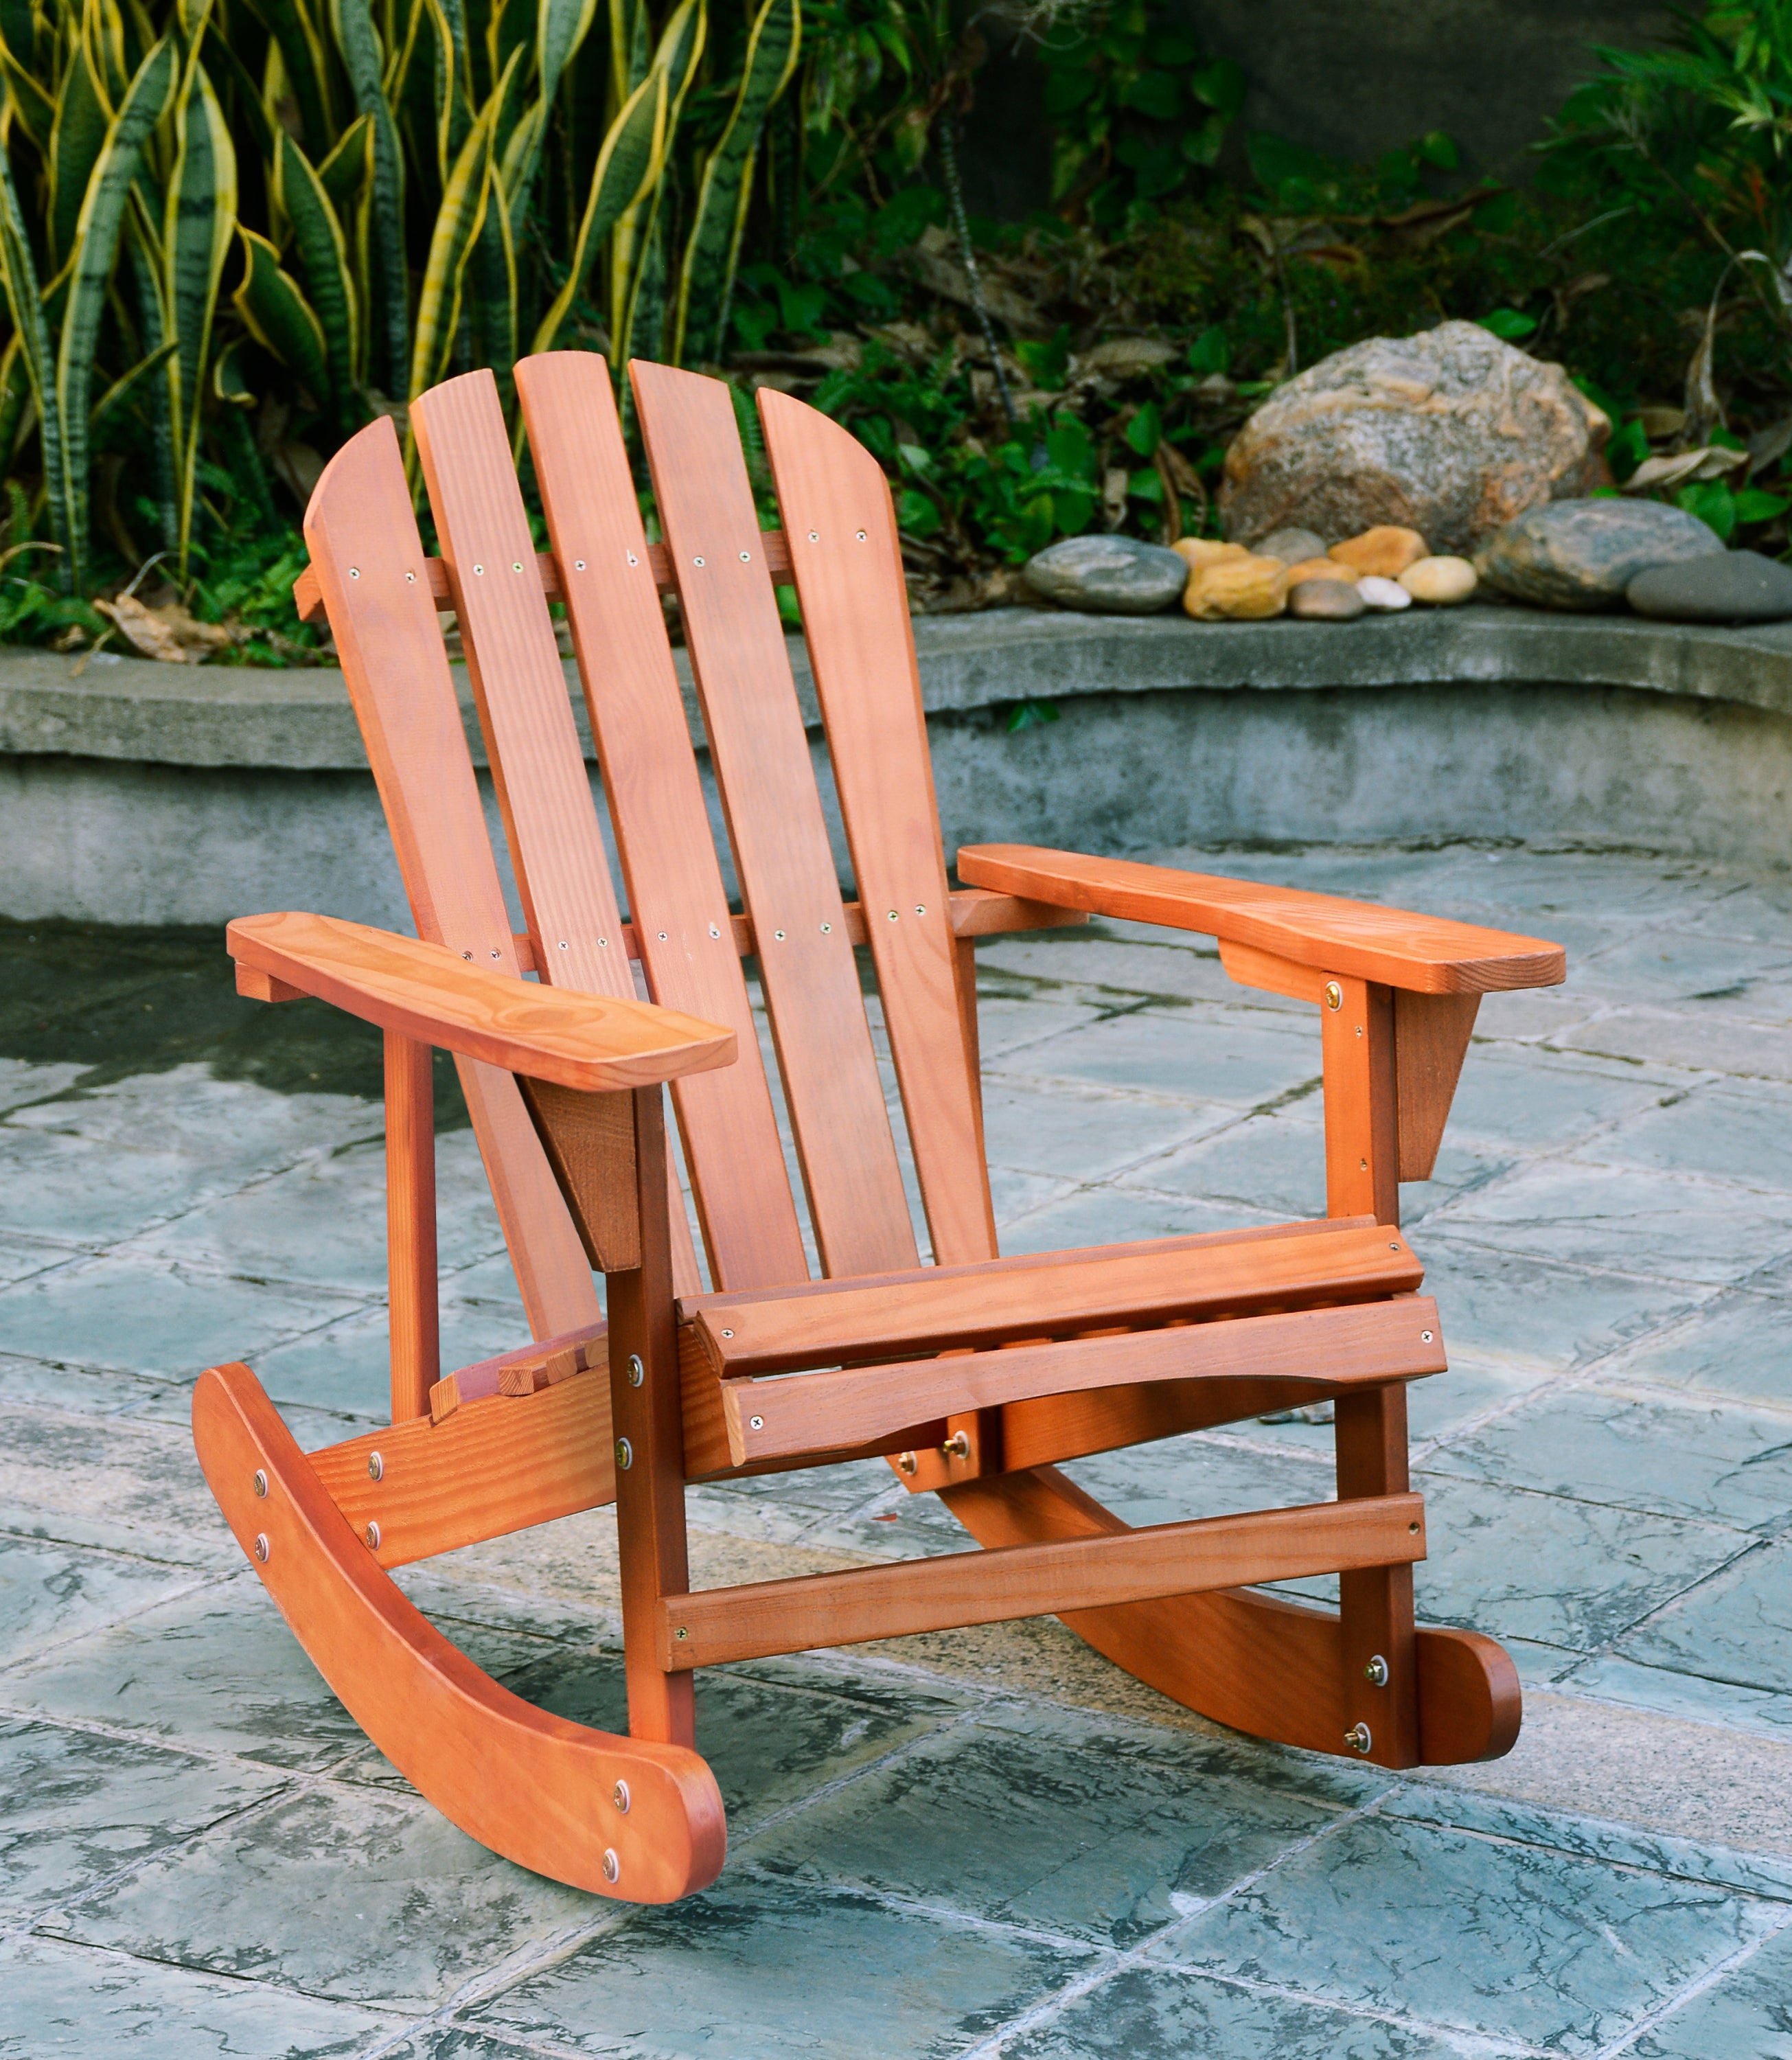 Adirondack-Rocking-Chair-Solid-Wood-Chairs-Finish-Outdoor-Furniture-for-Patio,-Backyard,-Garden-Walnut-Brown-Outdoor-Chairs